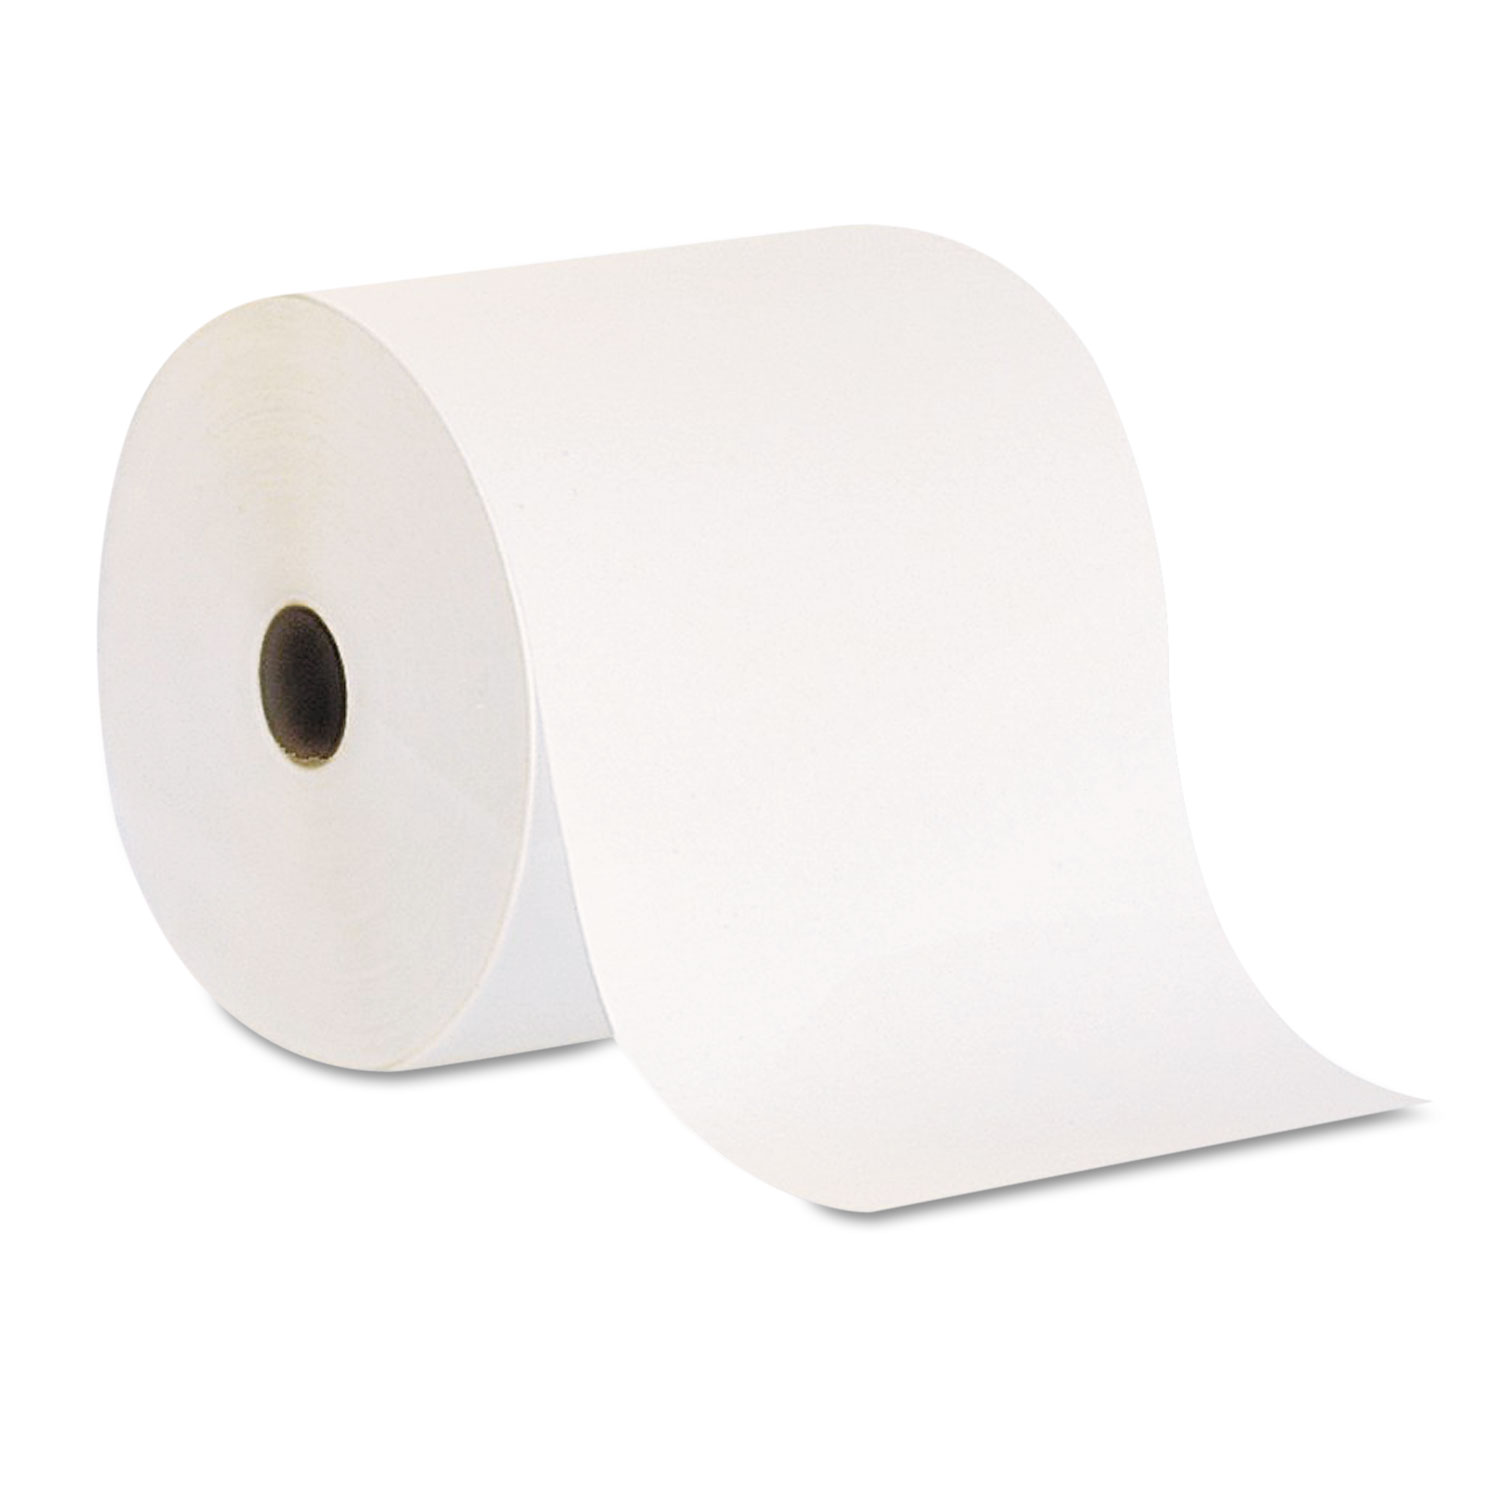  Georgia Pacific Professional 26601 Pacific Blue Basic Nonperf Paper Towel Rolls, 7 7/8 x 800 ft, White, 6 Rolls/CT (GPC26601) 